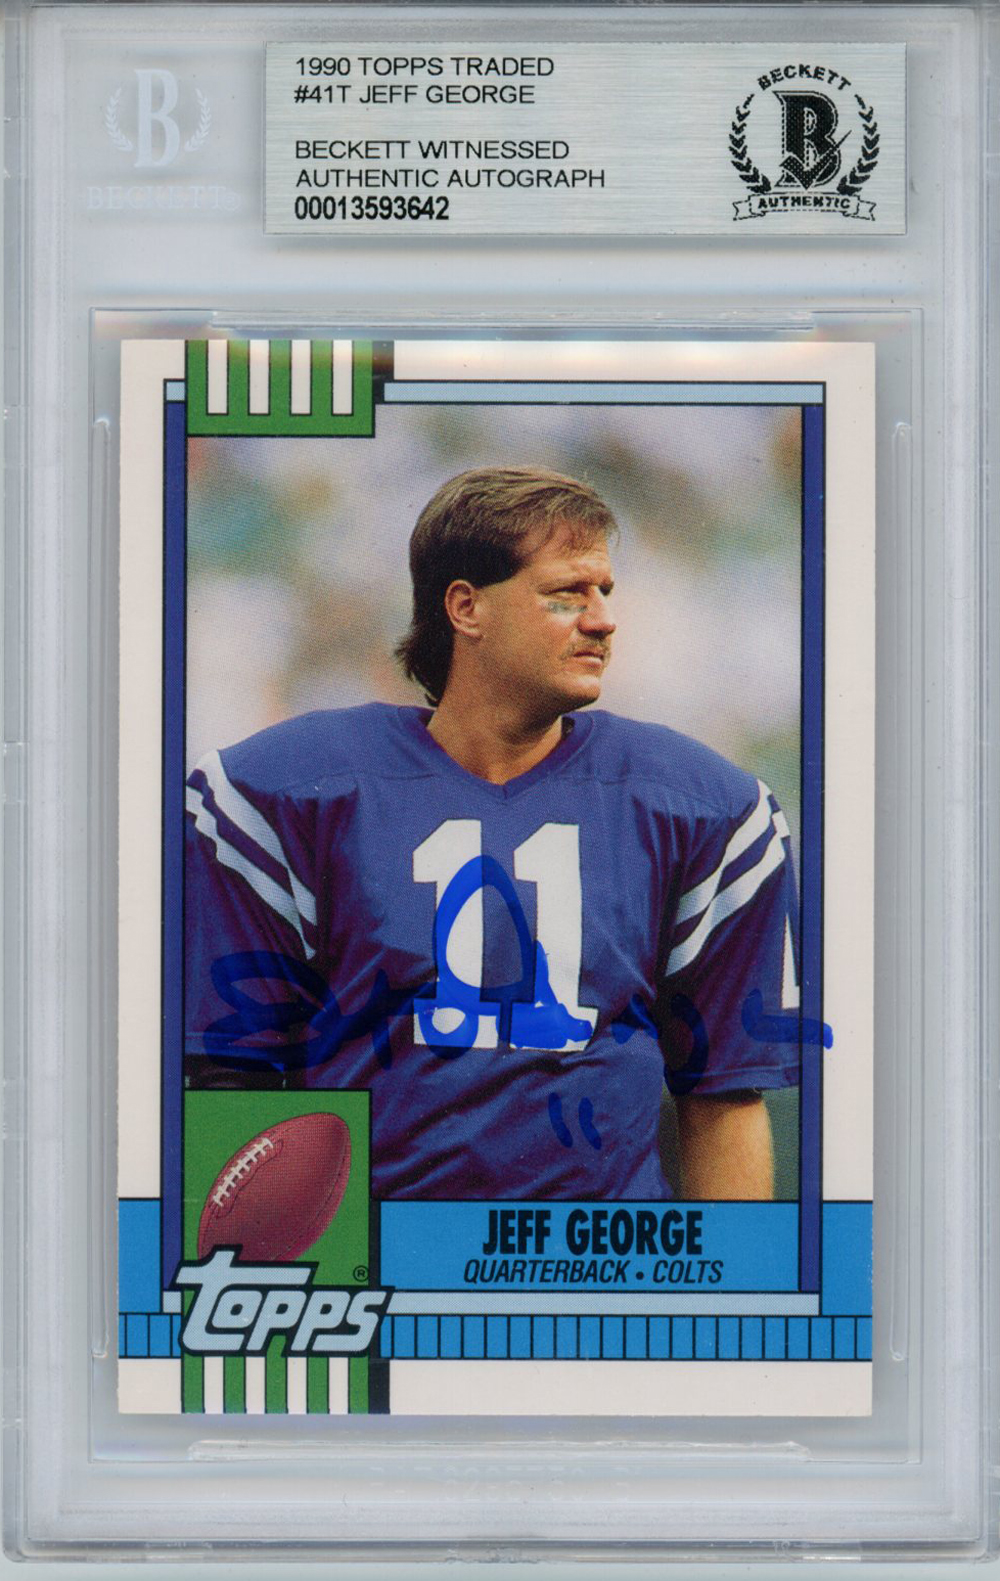 Jeff George Signed 1990 Topps Traded #41T Rookie Card Beckett Slab